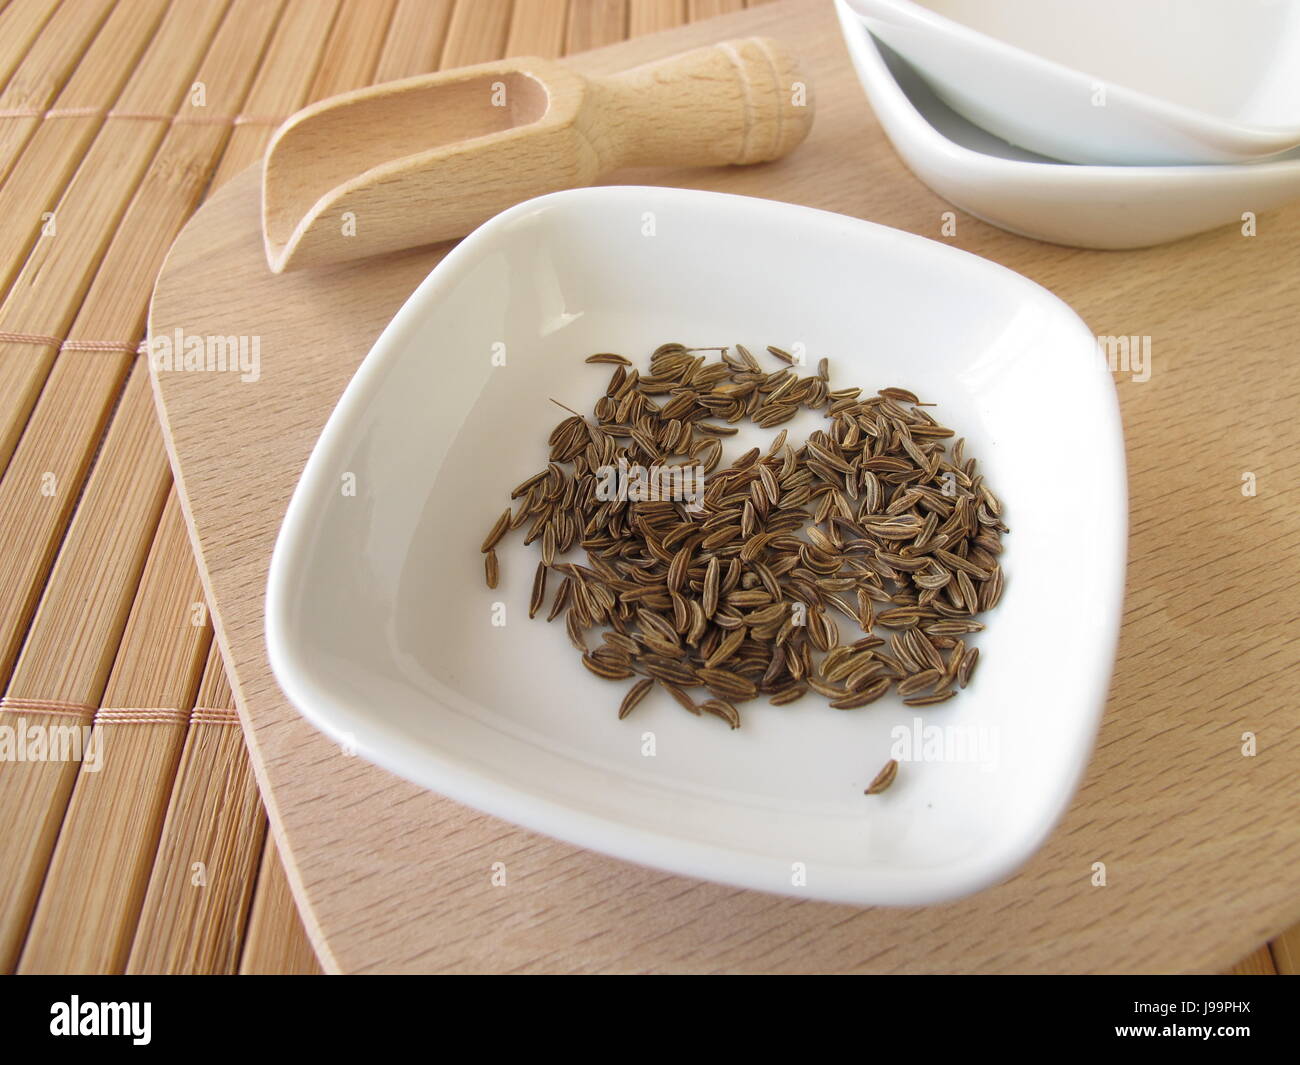 spice, caraway, naturopathy, tea, spice, sperm, material, drug, anaesthetic, Stock Photo